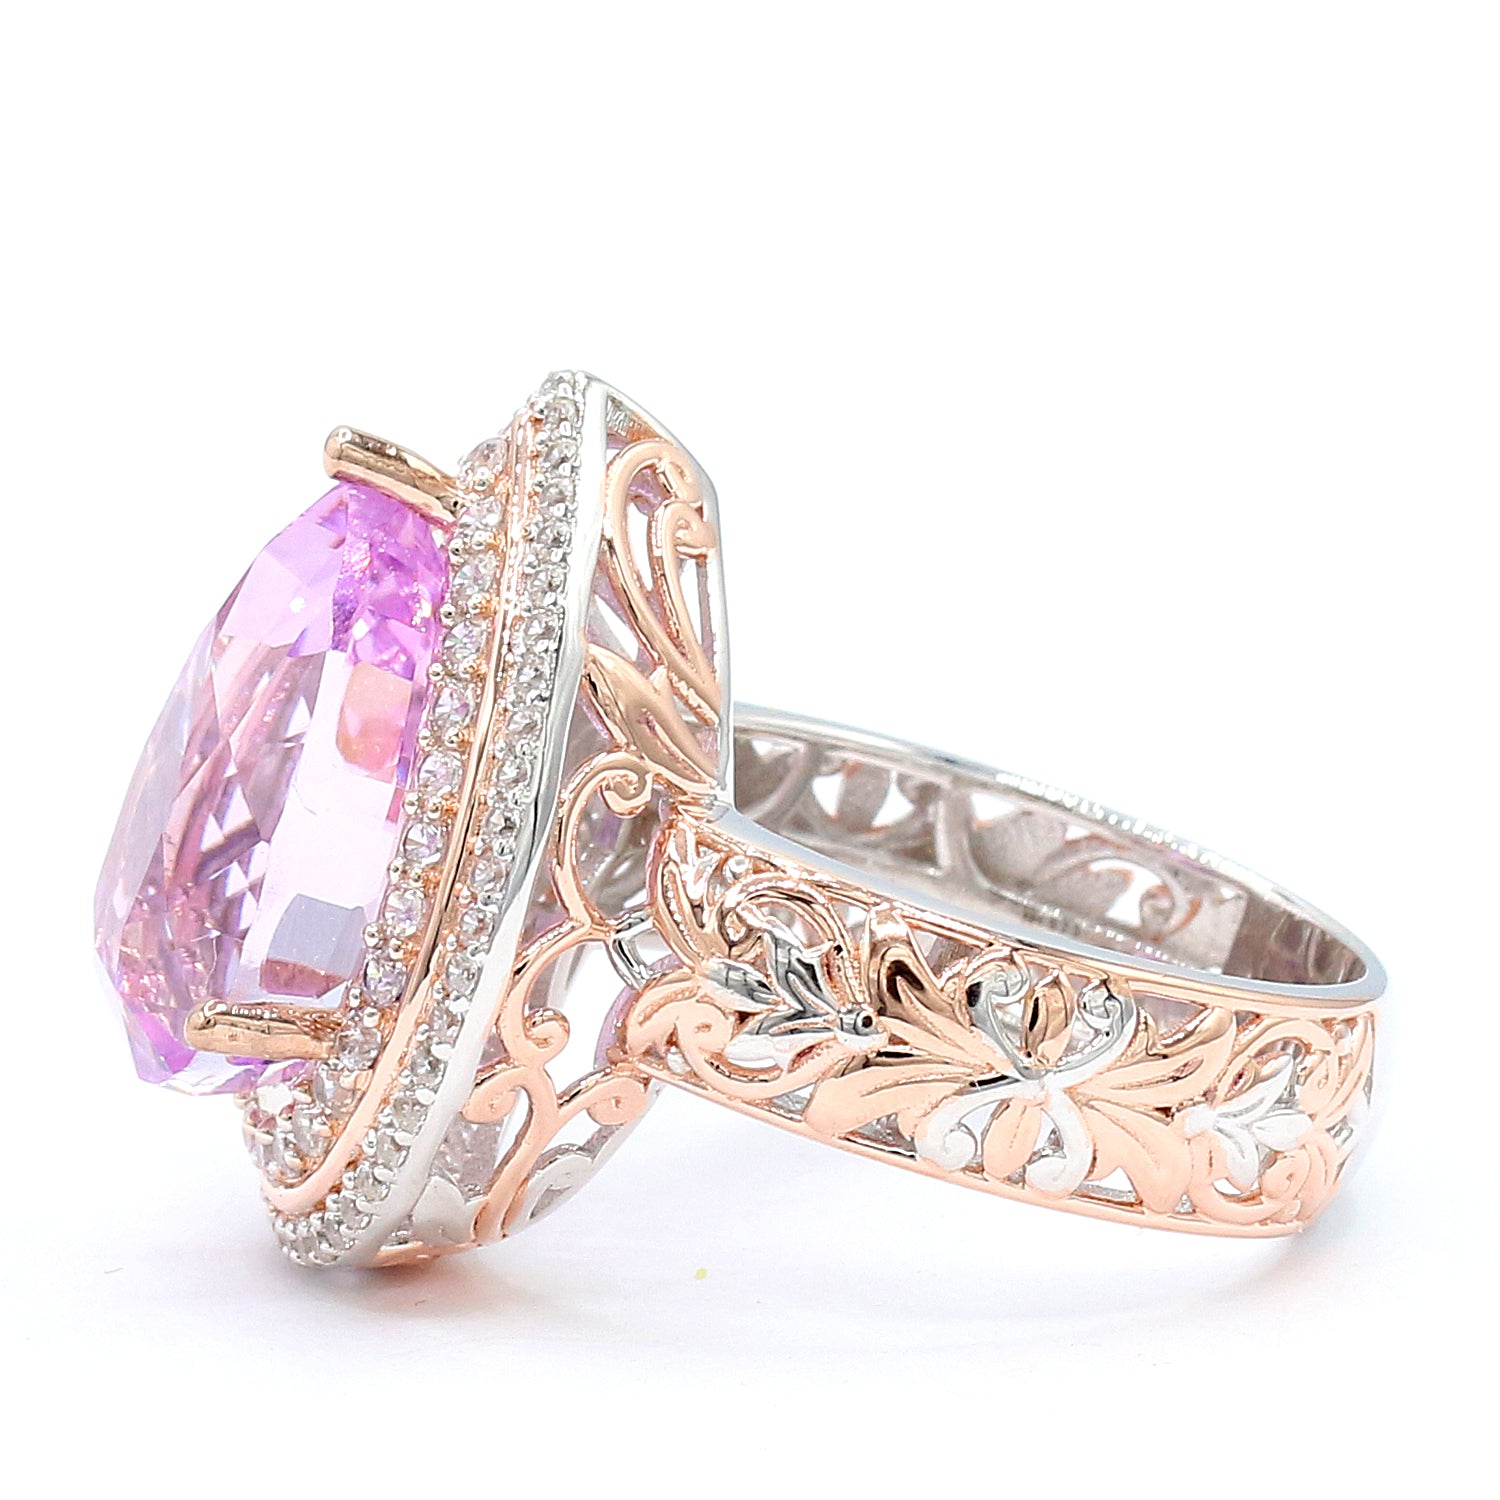 Limited Edition Gems en Vogue Luxe One-of-a-Kind 10.52ctw Kunzite & White Zircon Double Halo Ring